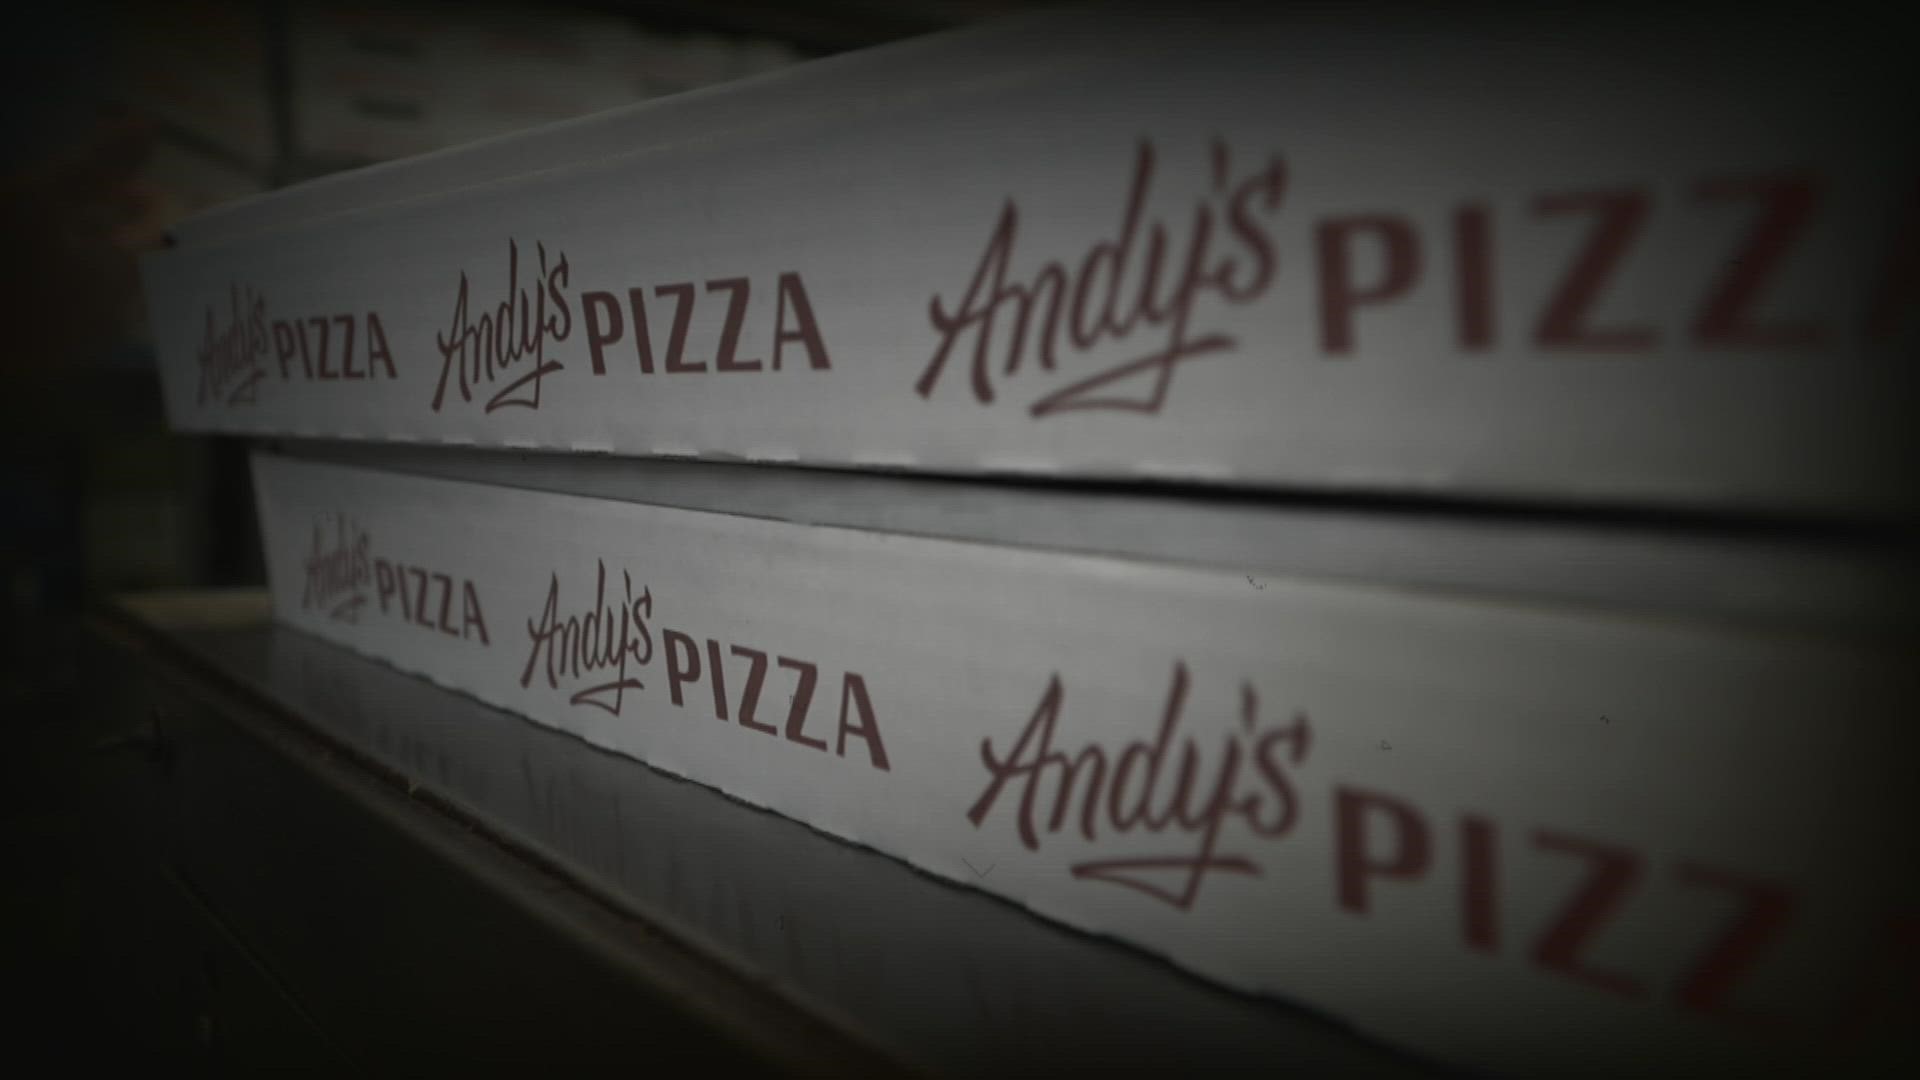 Andy Brown of Andy's Pizza invited WUSA9 inside his kitchen to talk about his aspirations of achieving pizza greatness.